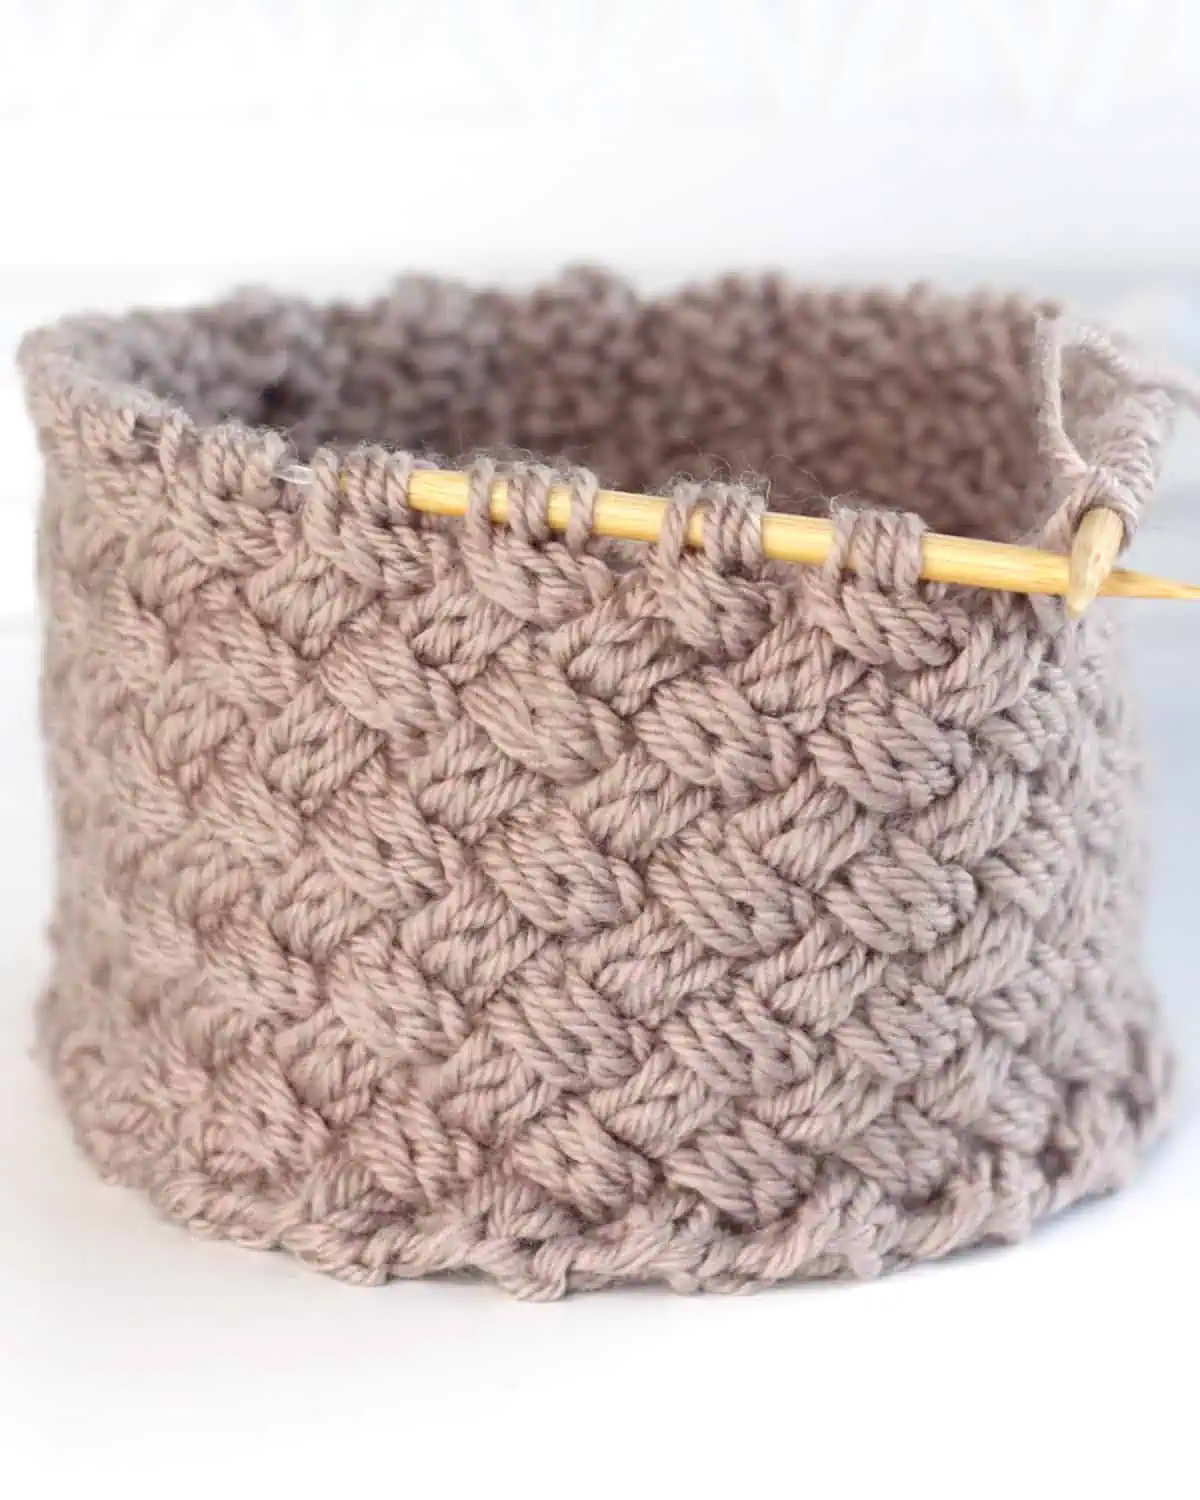 Diagonal Basket Weave Cable Stitch in gray-colored yarn on circular needles.